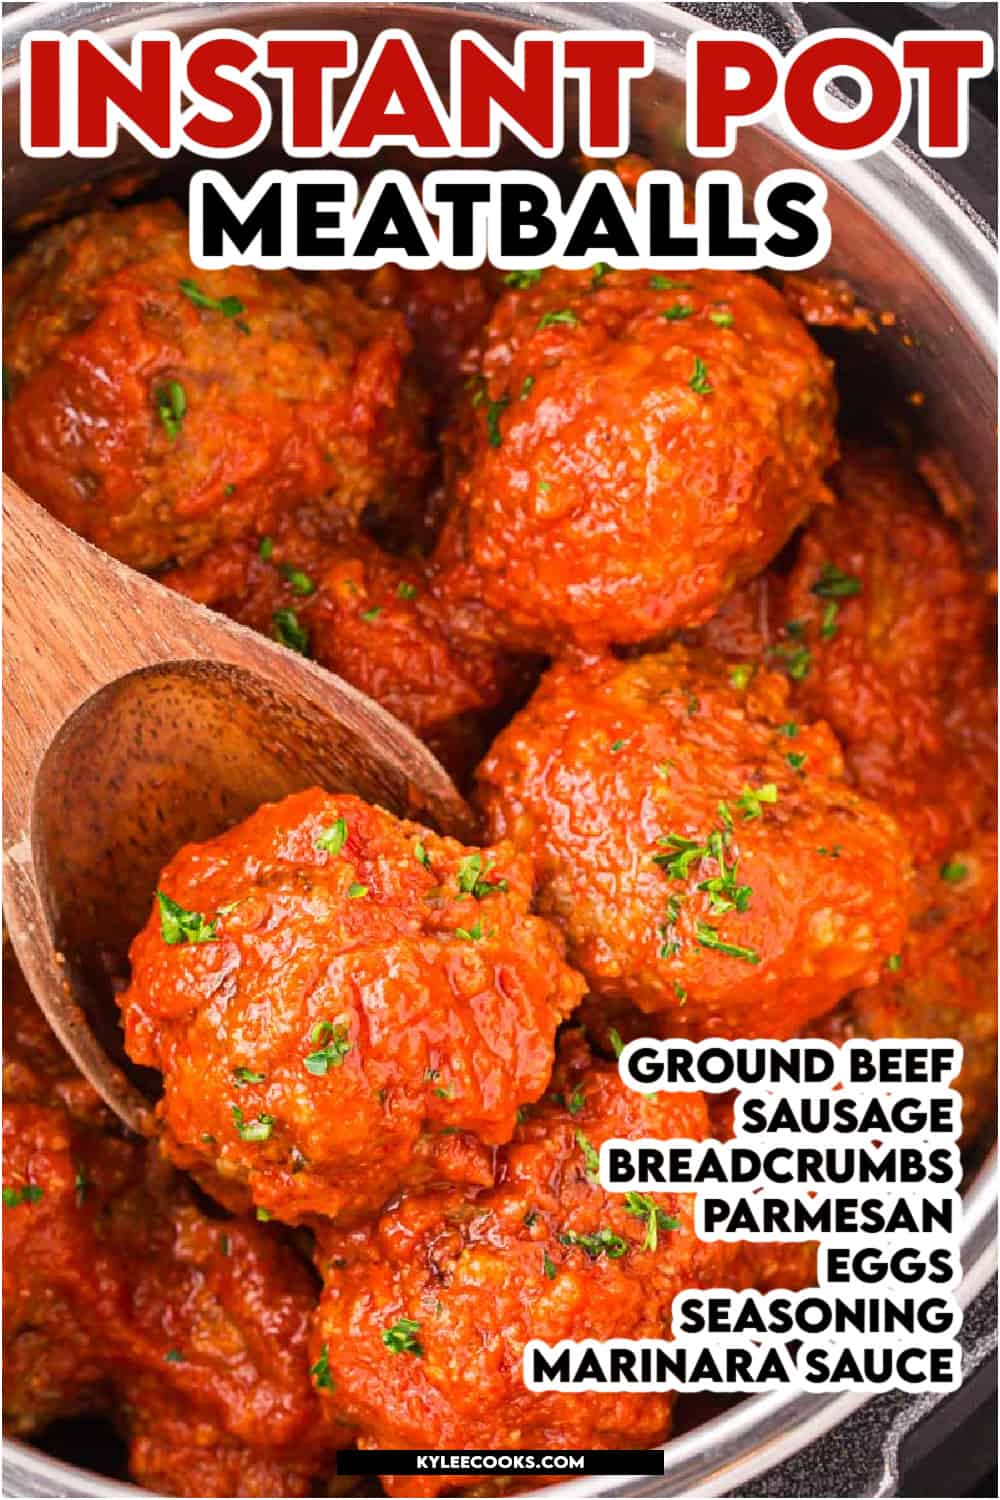 a meatball on a ladle, with recipe name and ingredients overlaid in text.